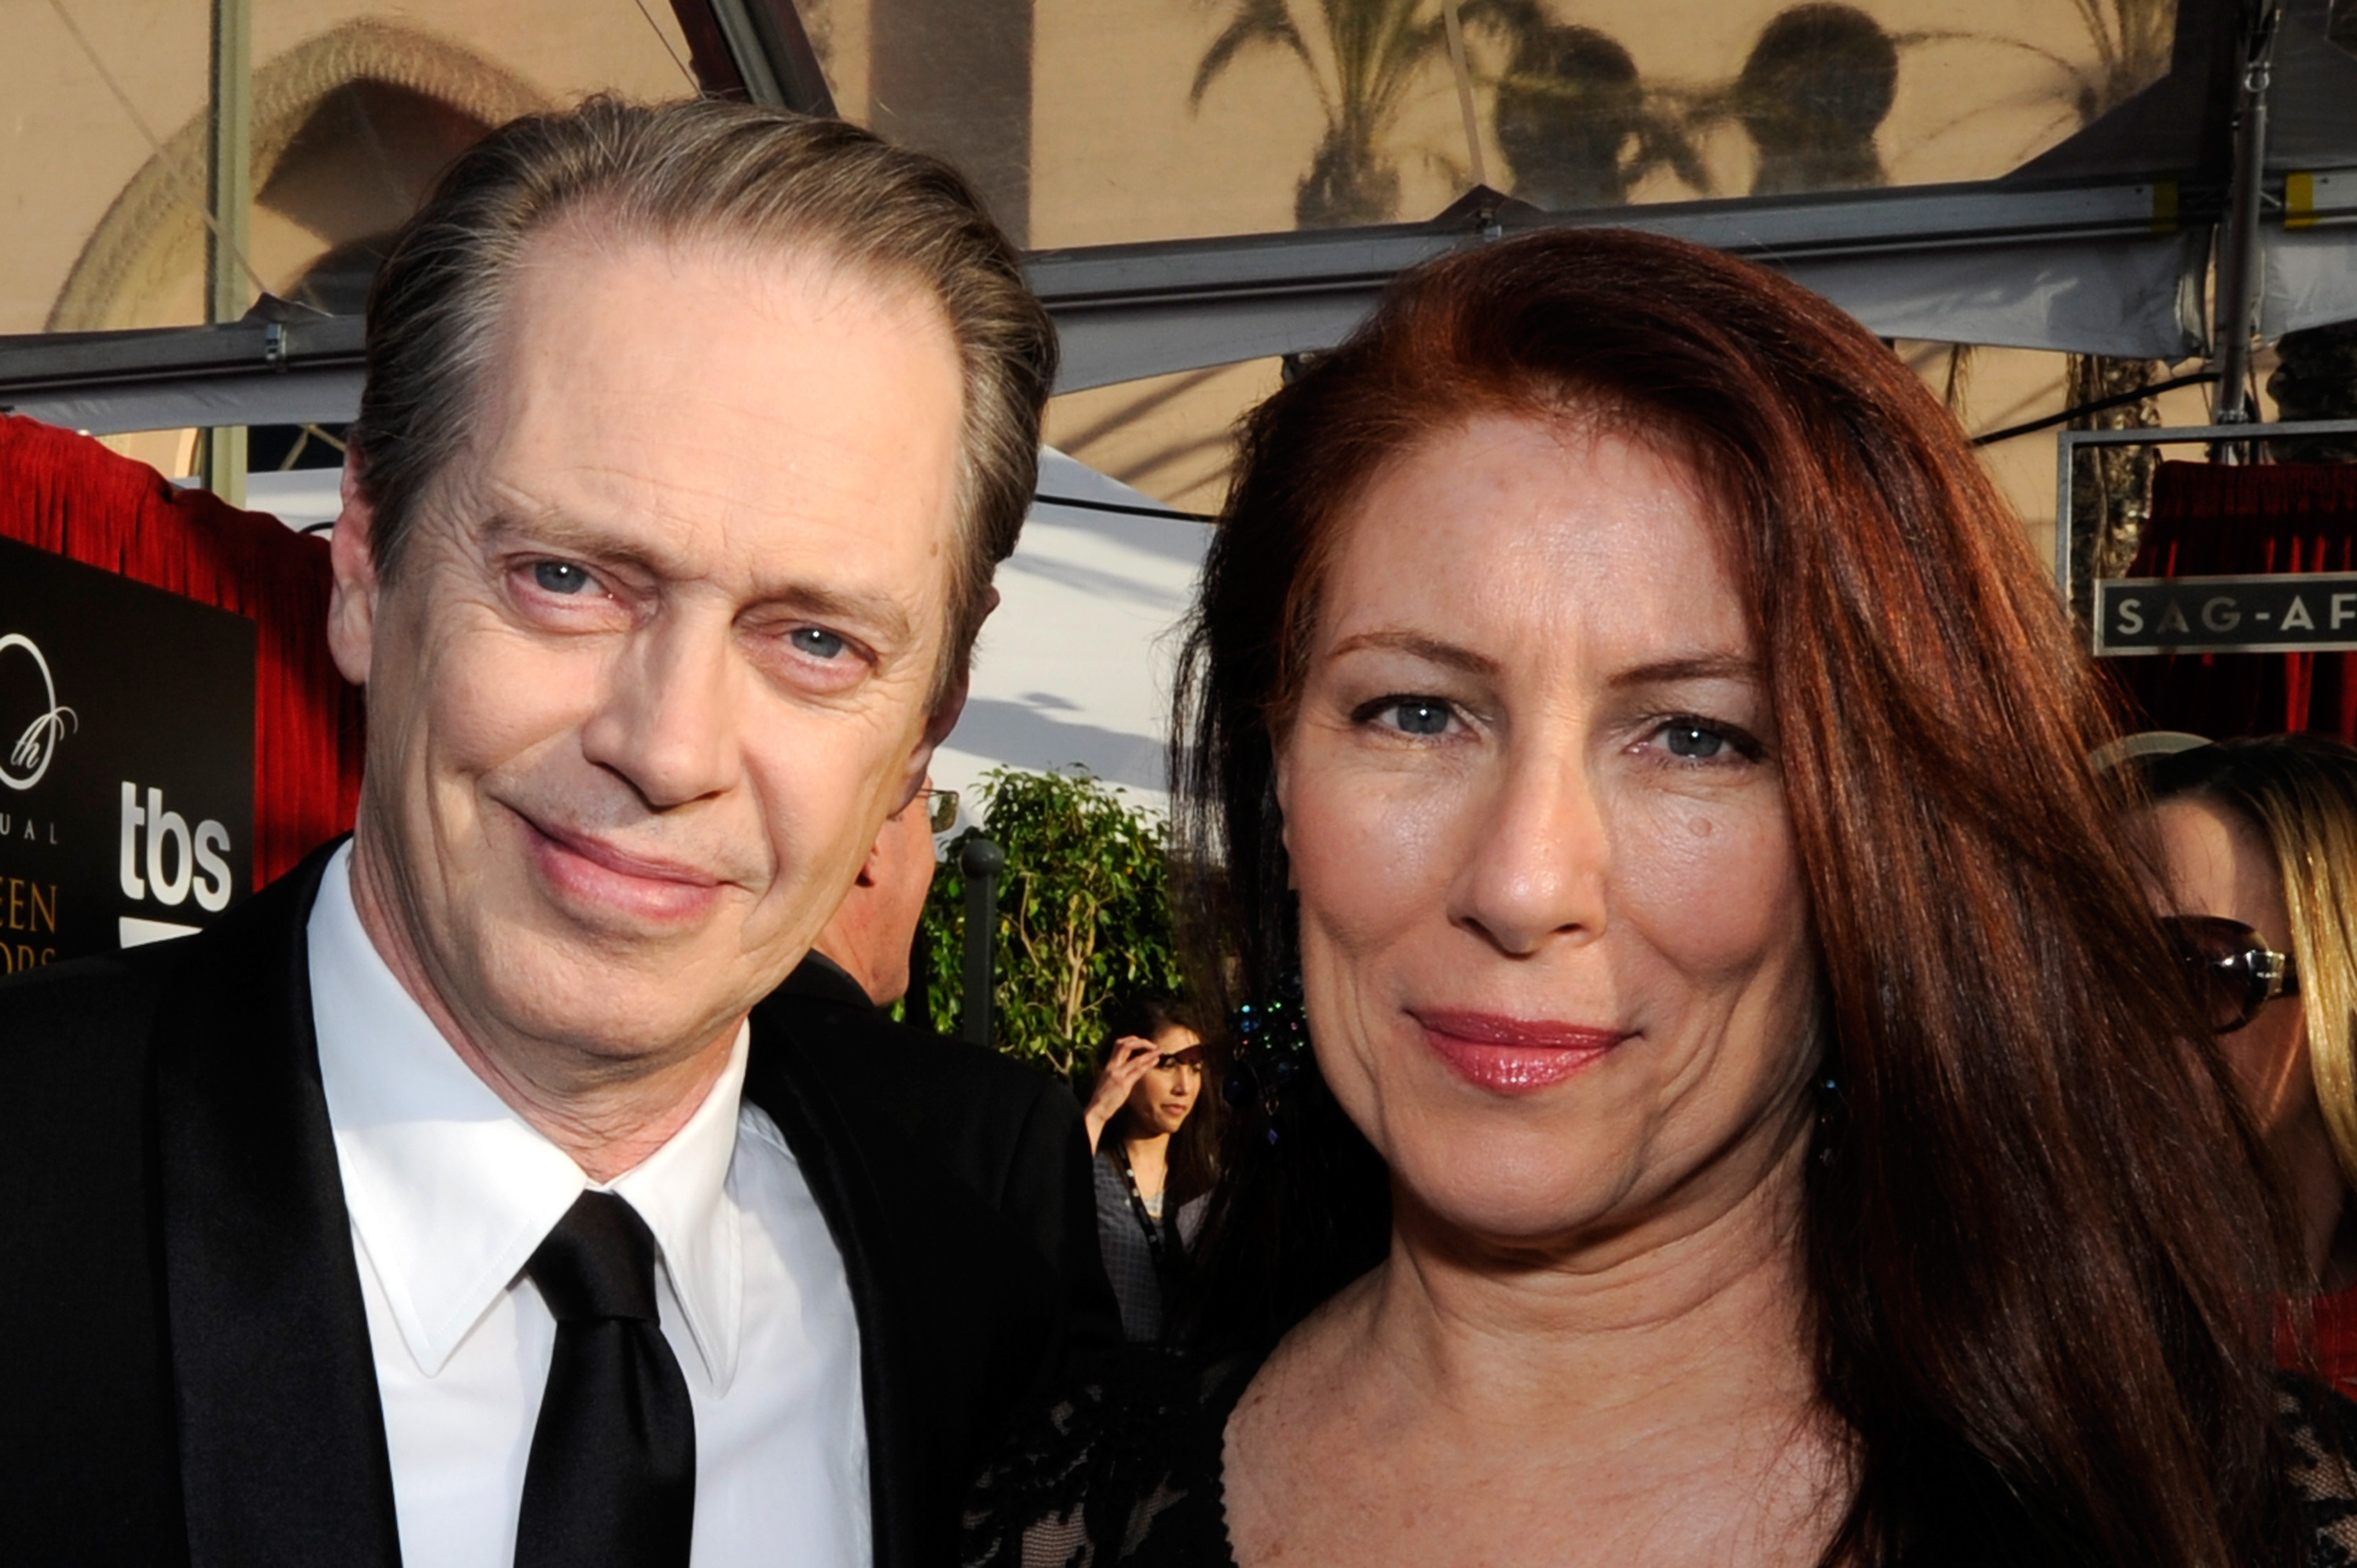 Steve Buscemi and Jo Andres at the 20th Annual Screen Actors Guild Awards on January 18, 2014, in Los Angeles, California. | Source: Getty Images